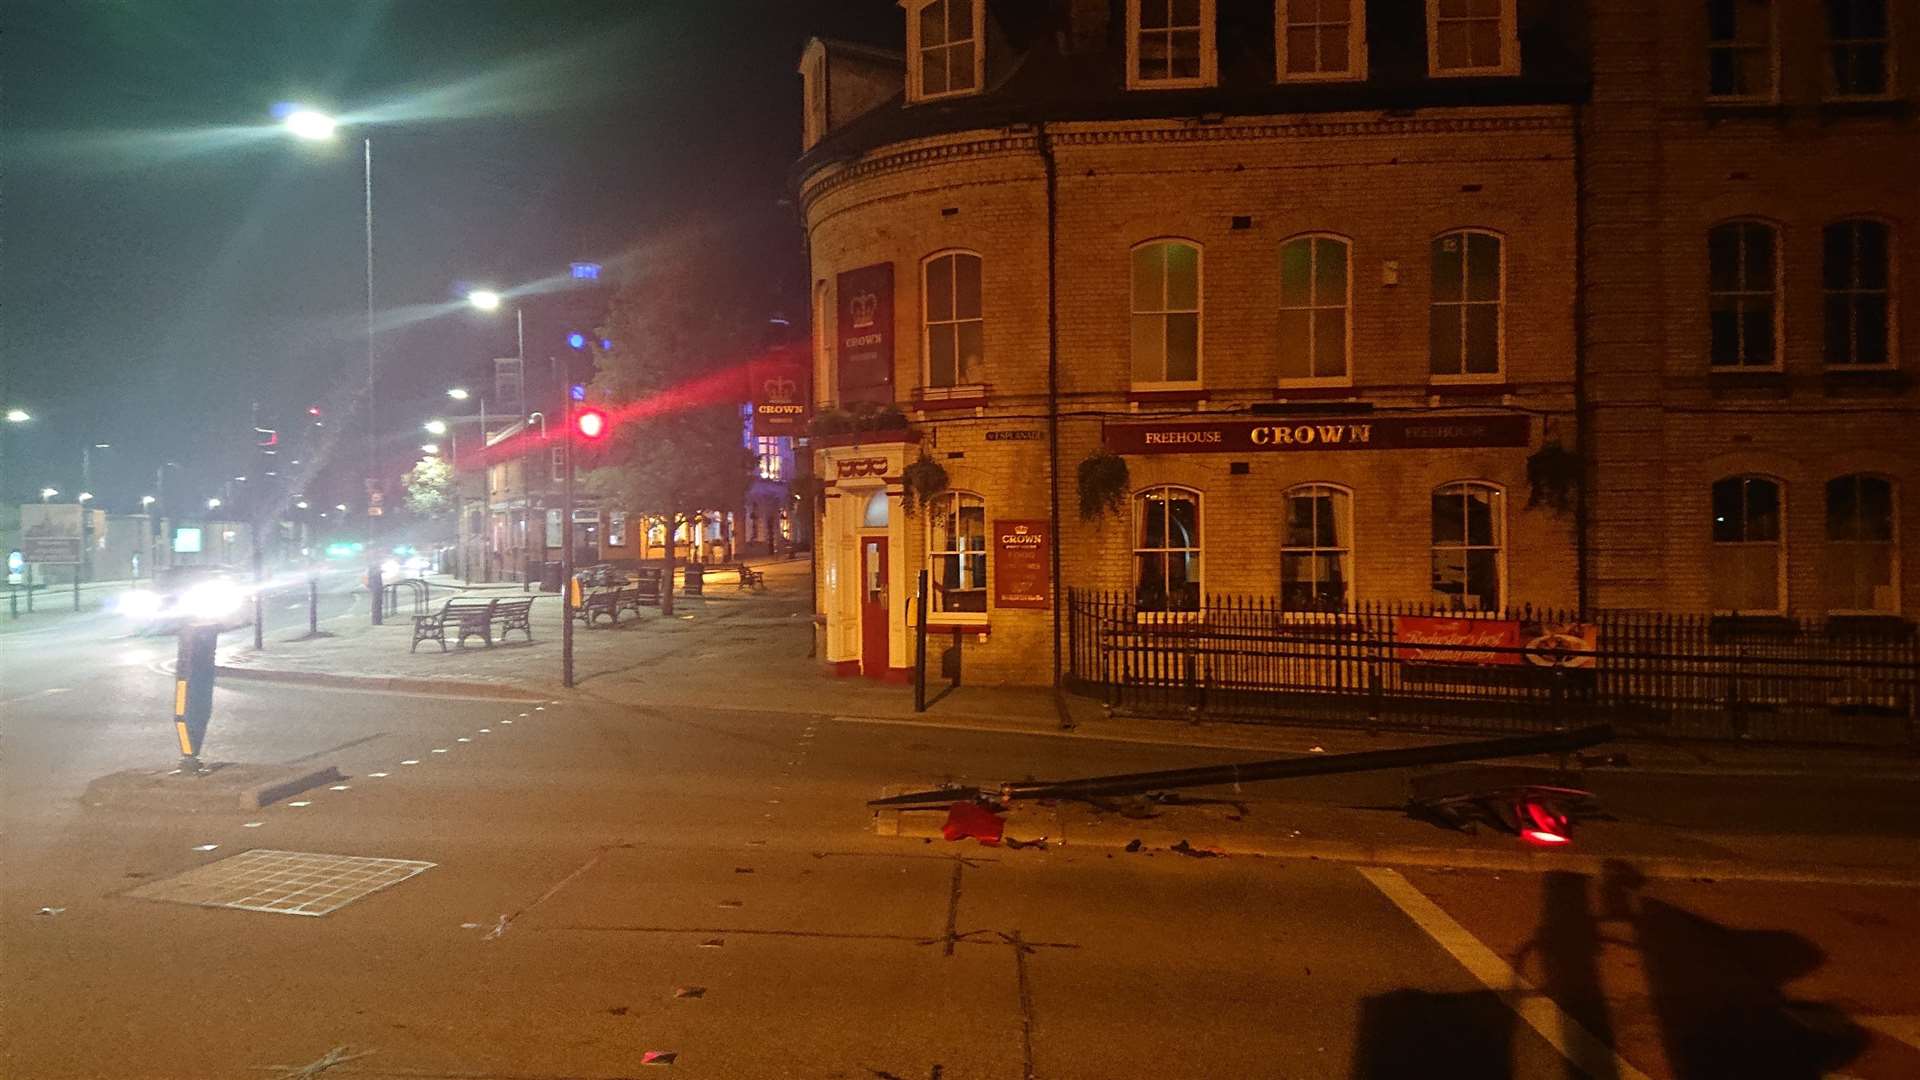 The accident happened outside the Crown pub in Rochester